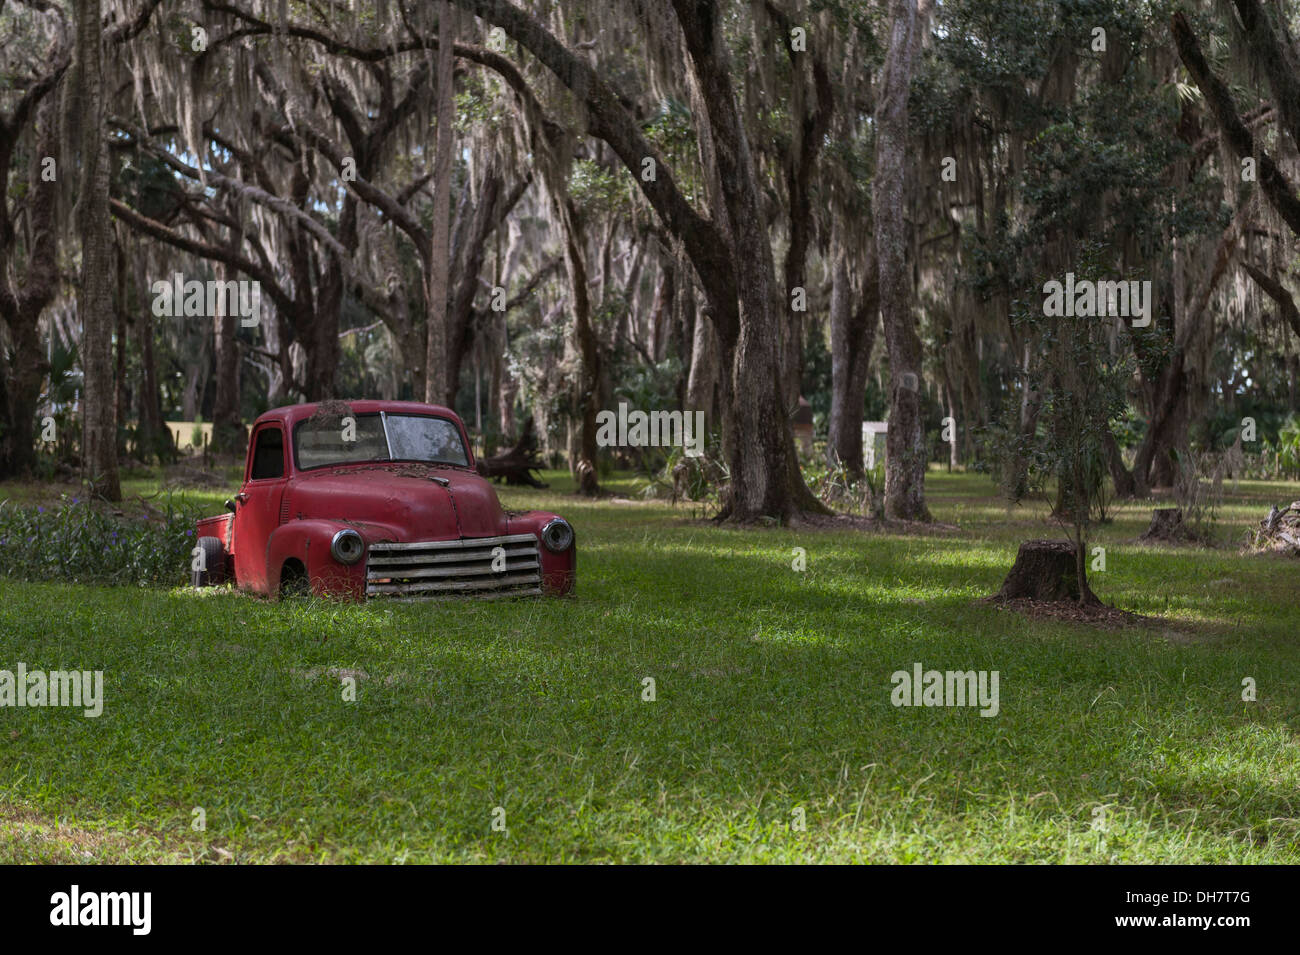 An old Chevrolet pickup truck being use as decoration on private property in Leesburg, Florida USA Stock Photo